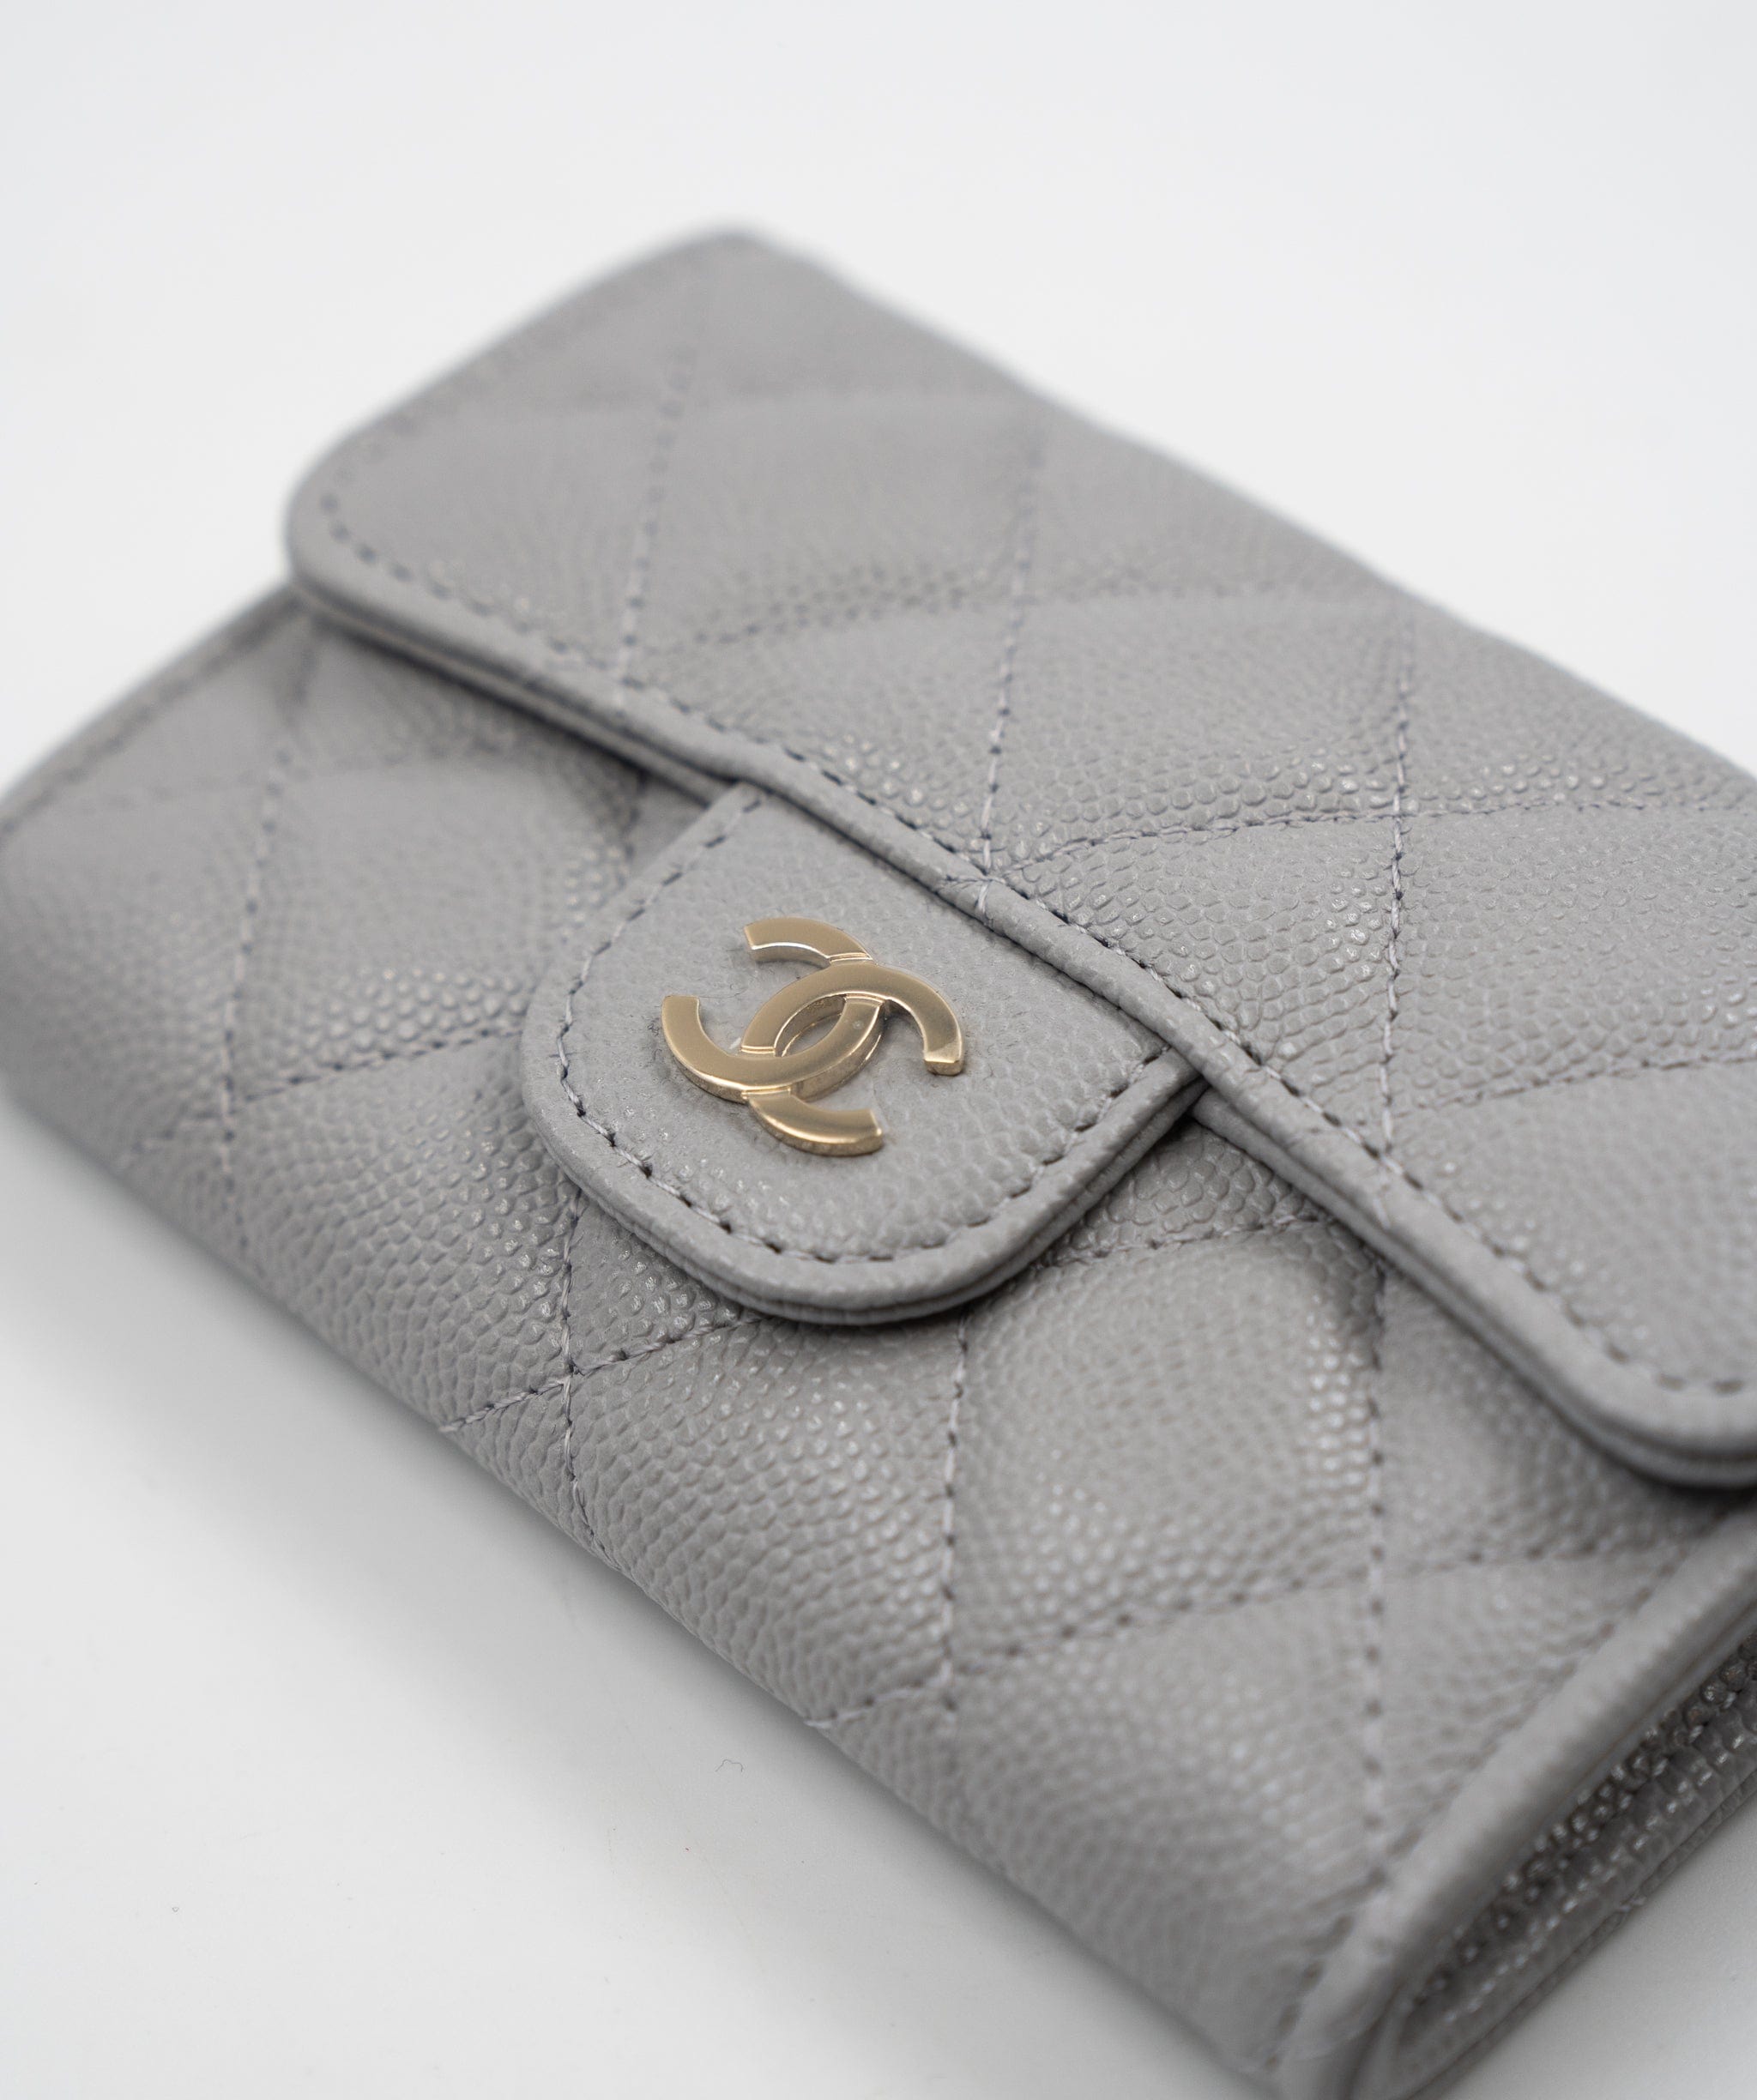 Chanel Chanel grey caviar card holder with a flap, full set - AEC1053